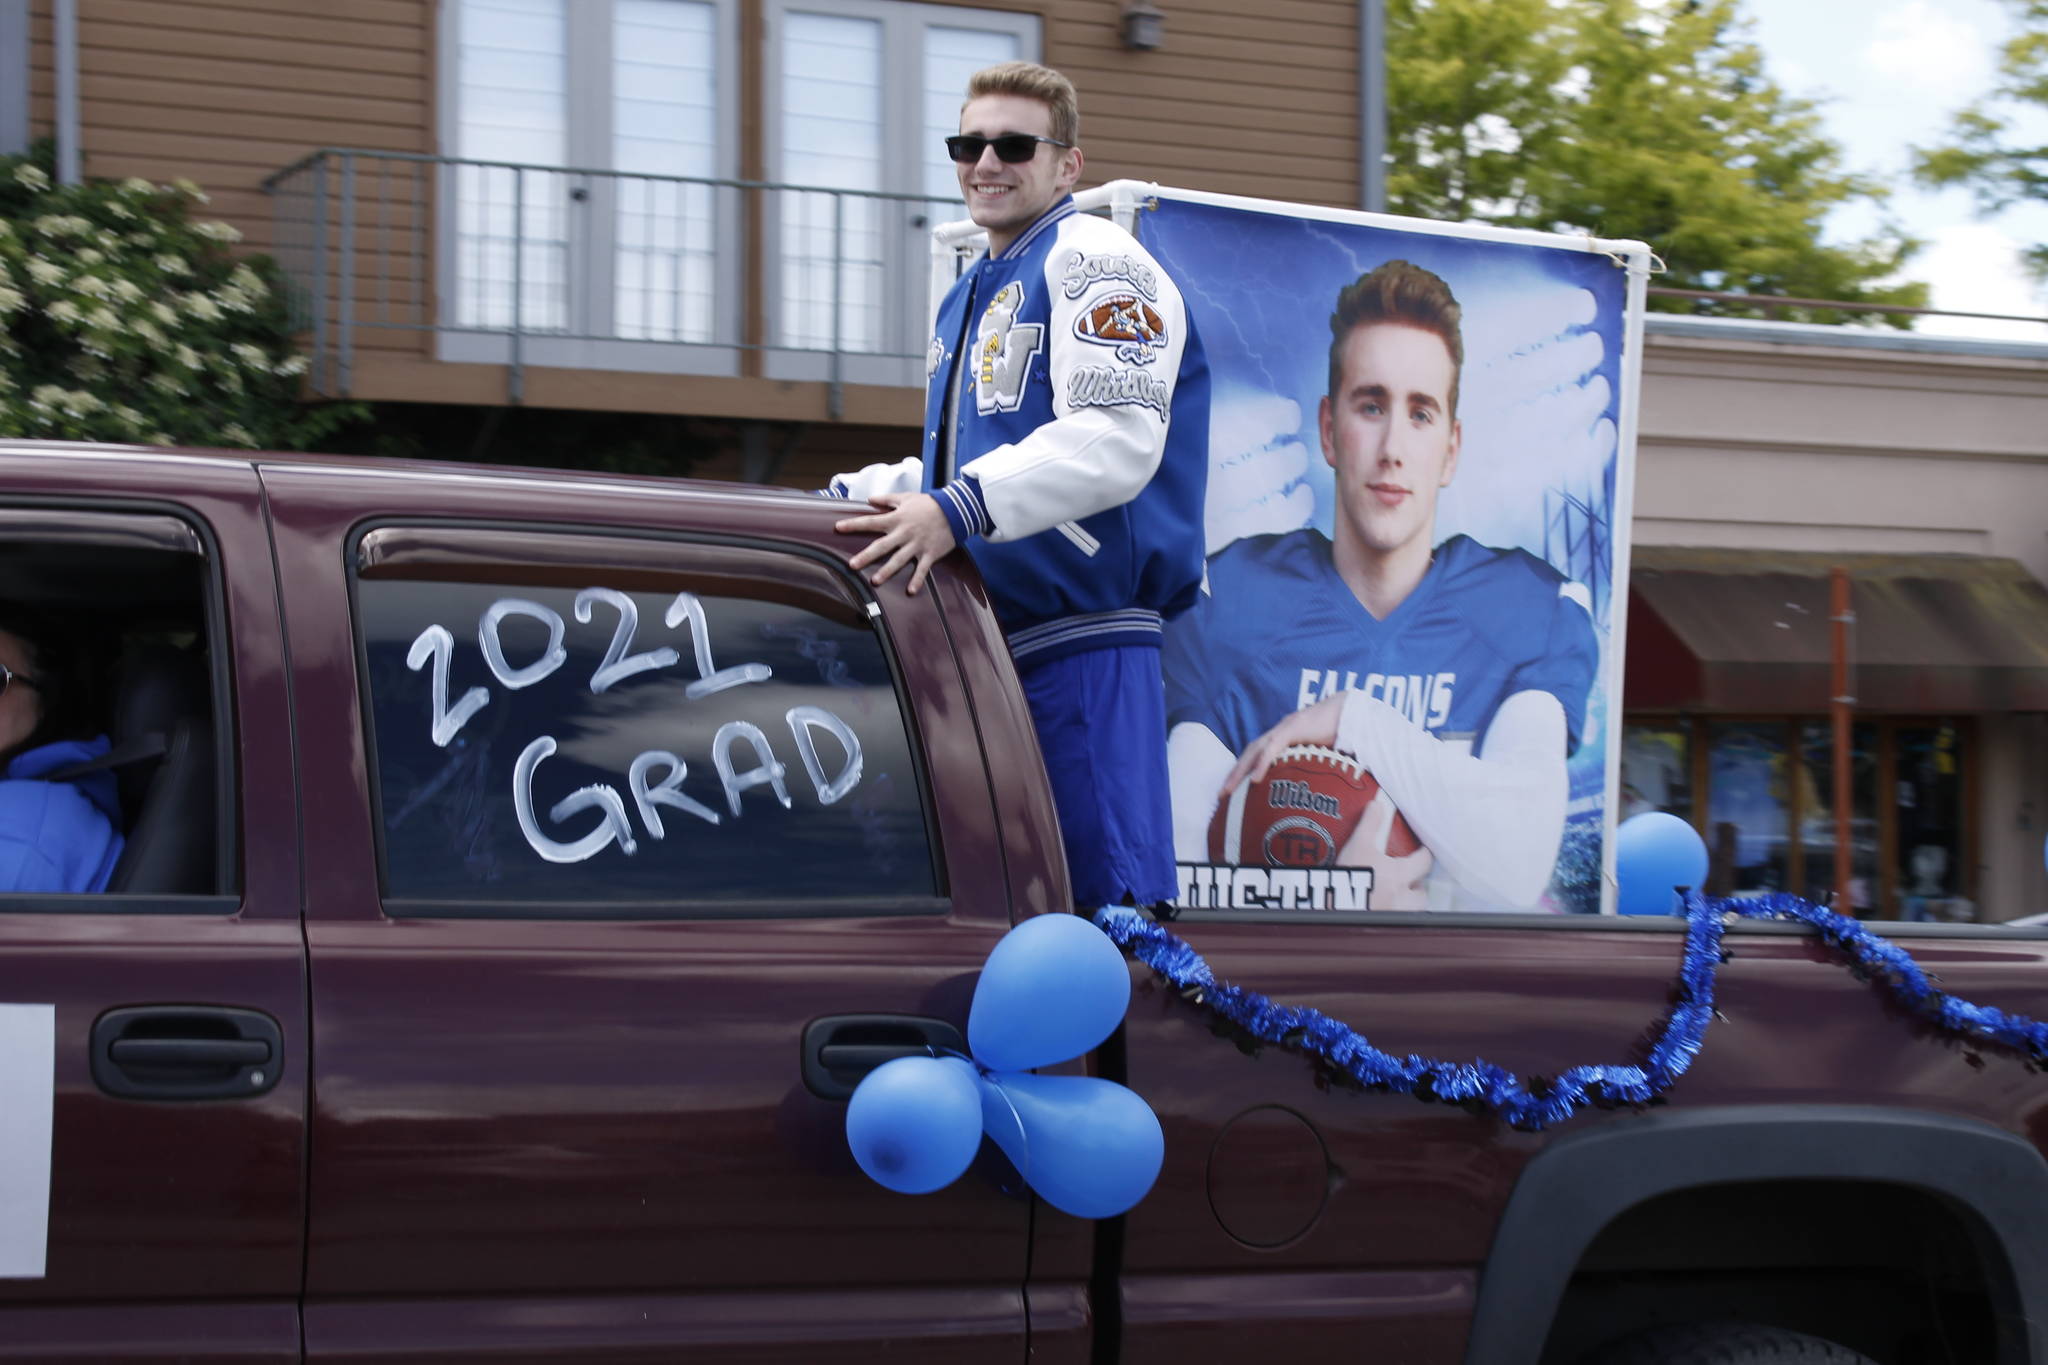 Senior Justin Moberly participates in the parade.